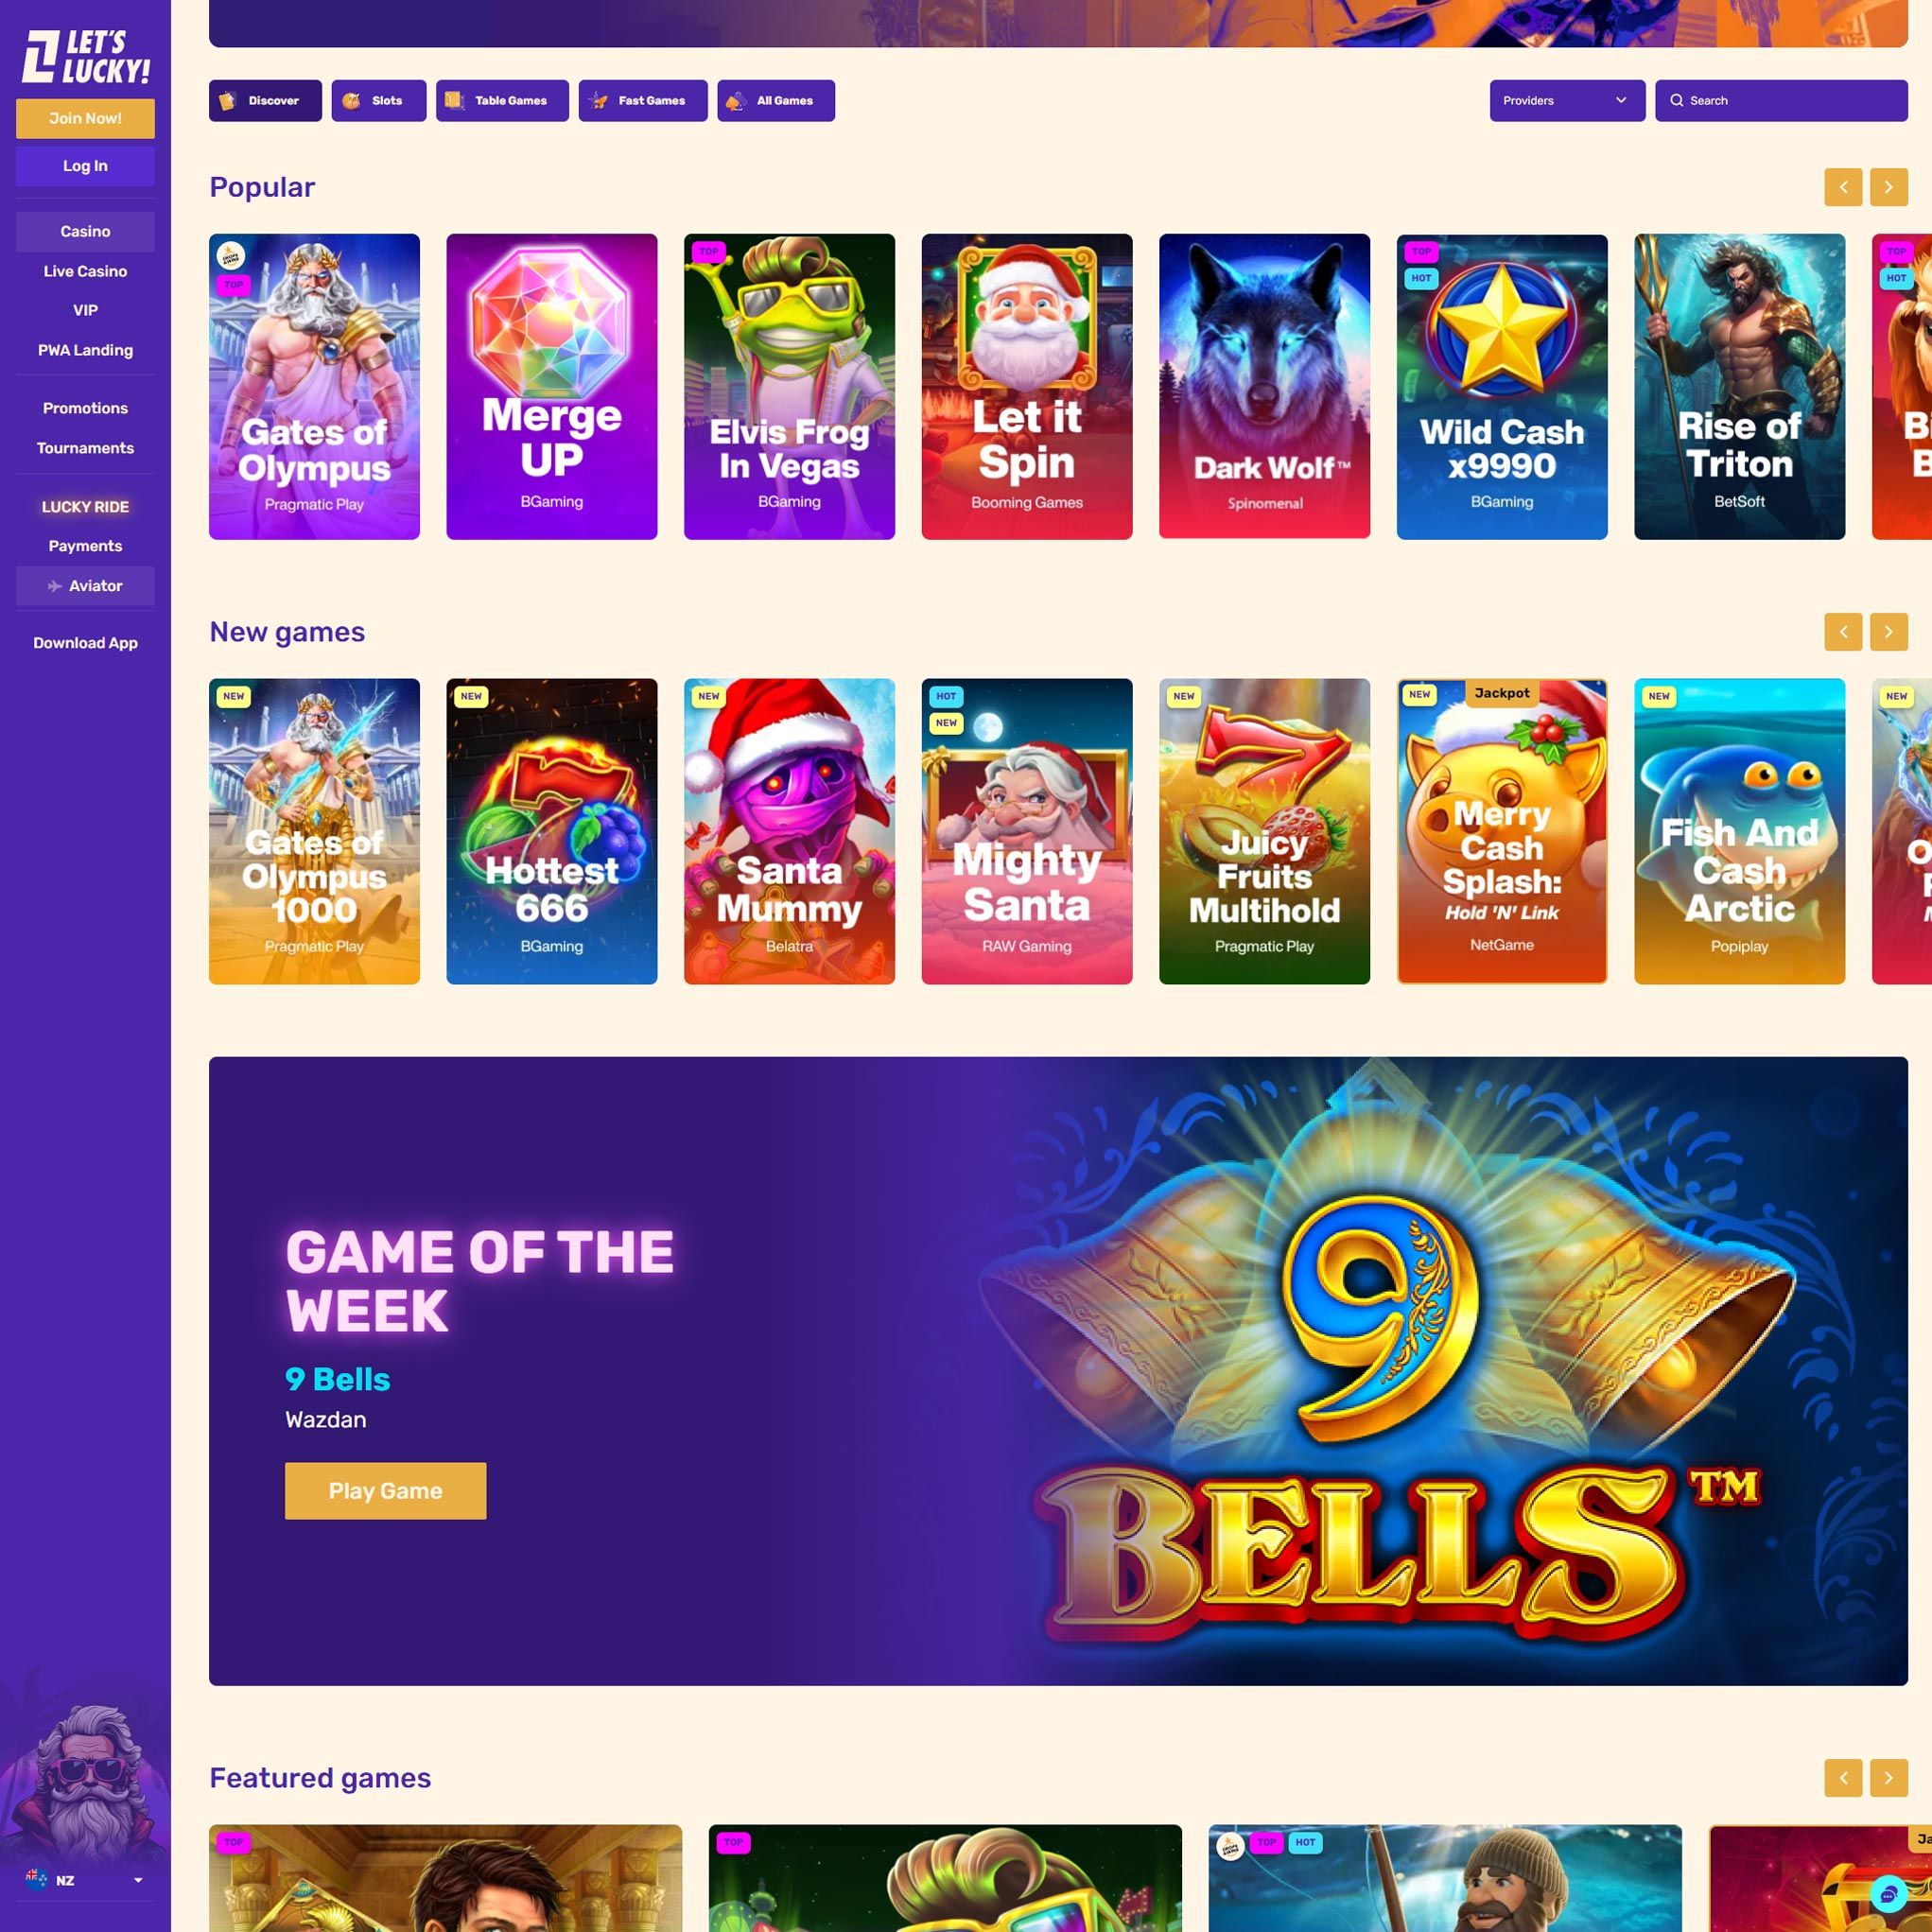 Let's Lucky Casino NZ review by Mr. Gamble